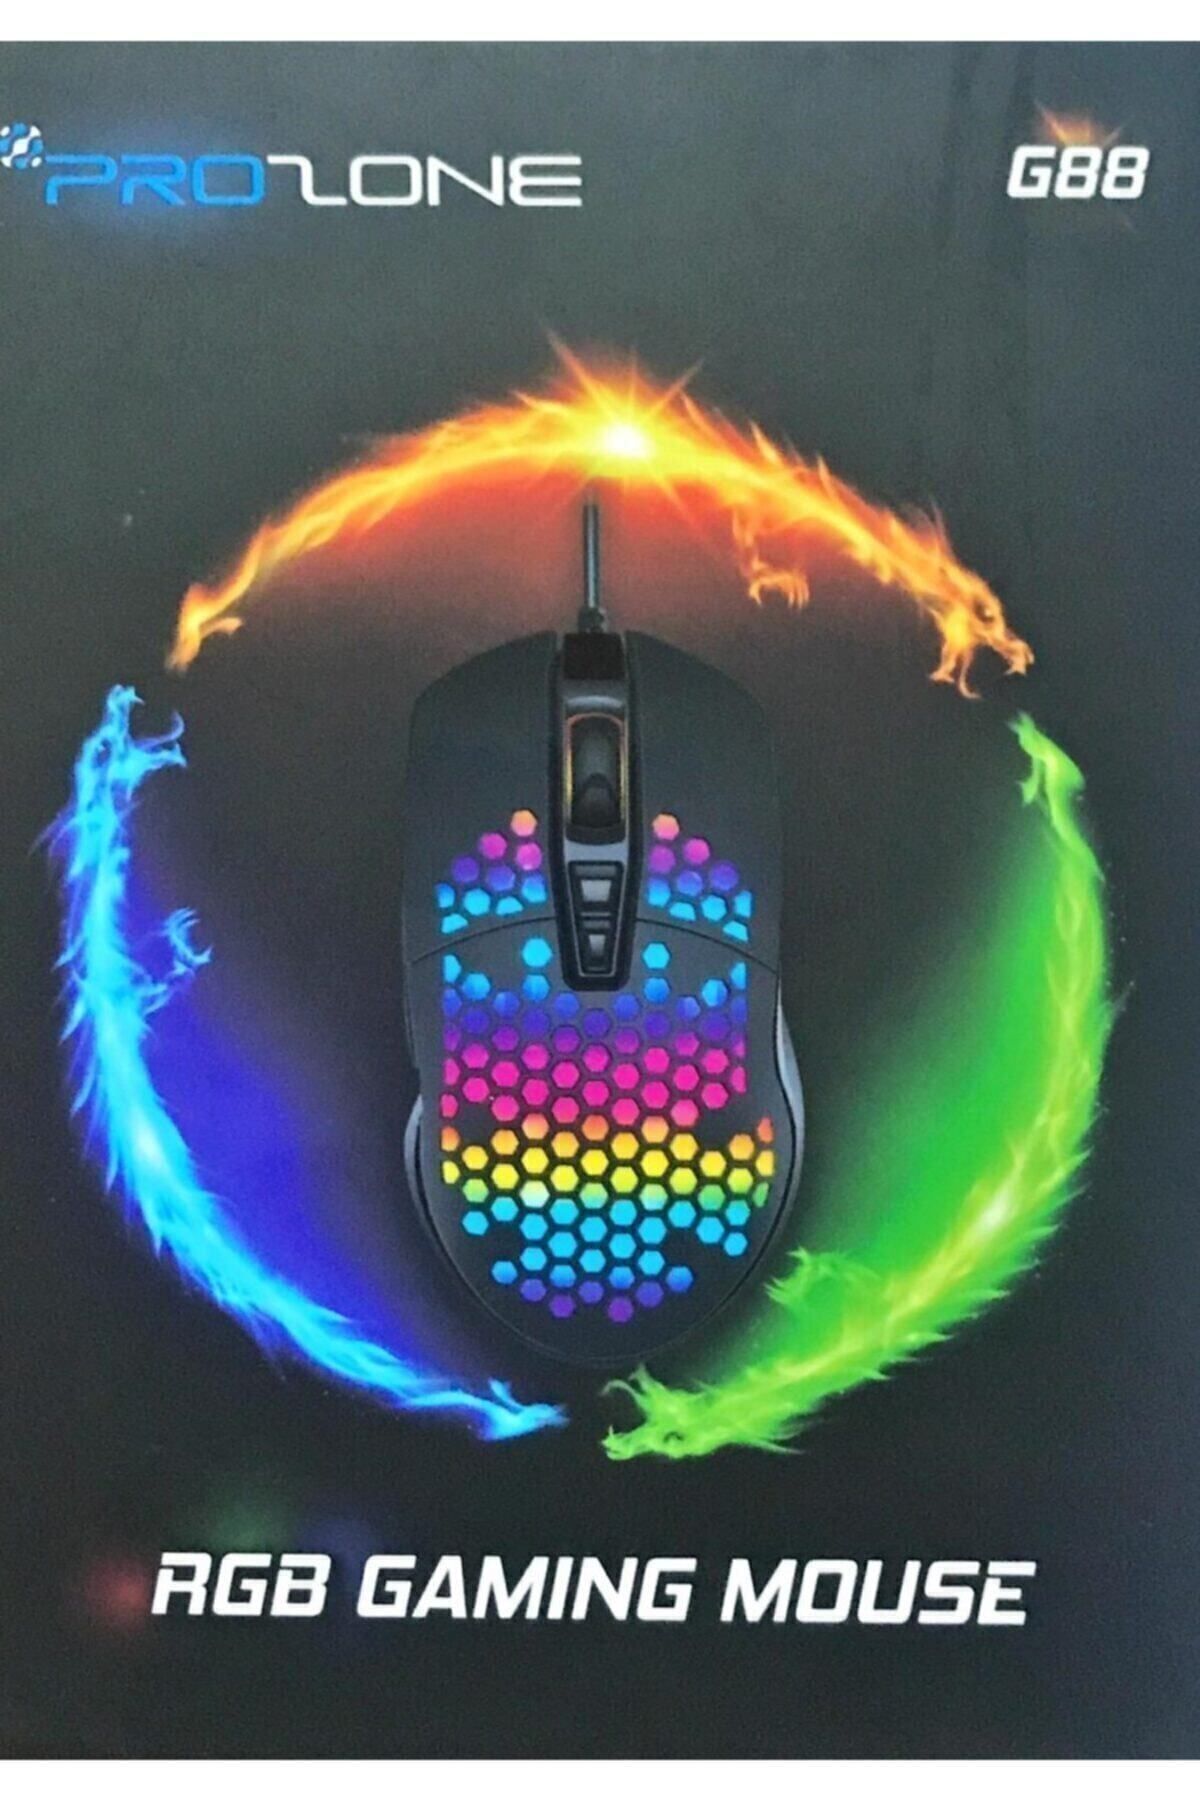 Prozone G88 Rgb Gaming Mouse